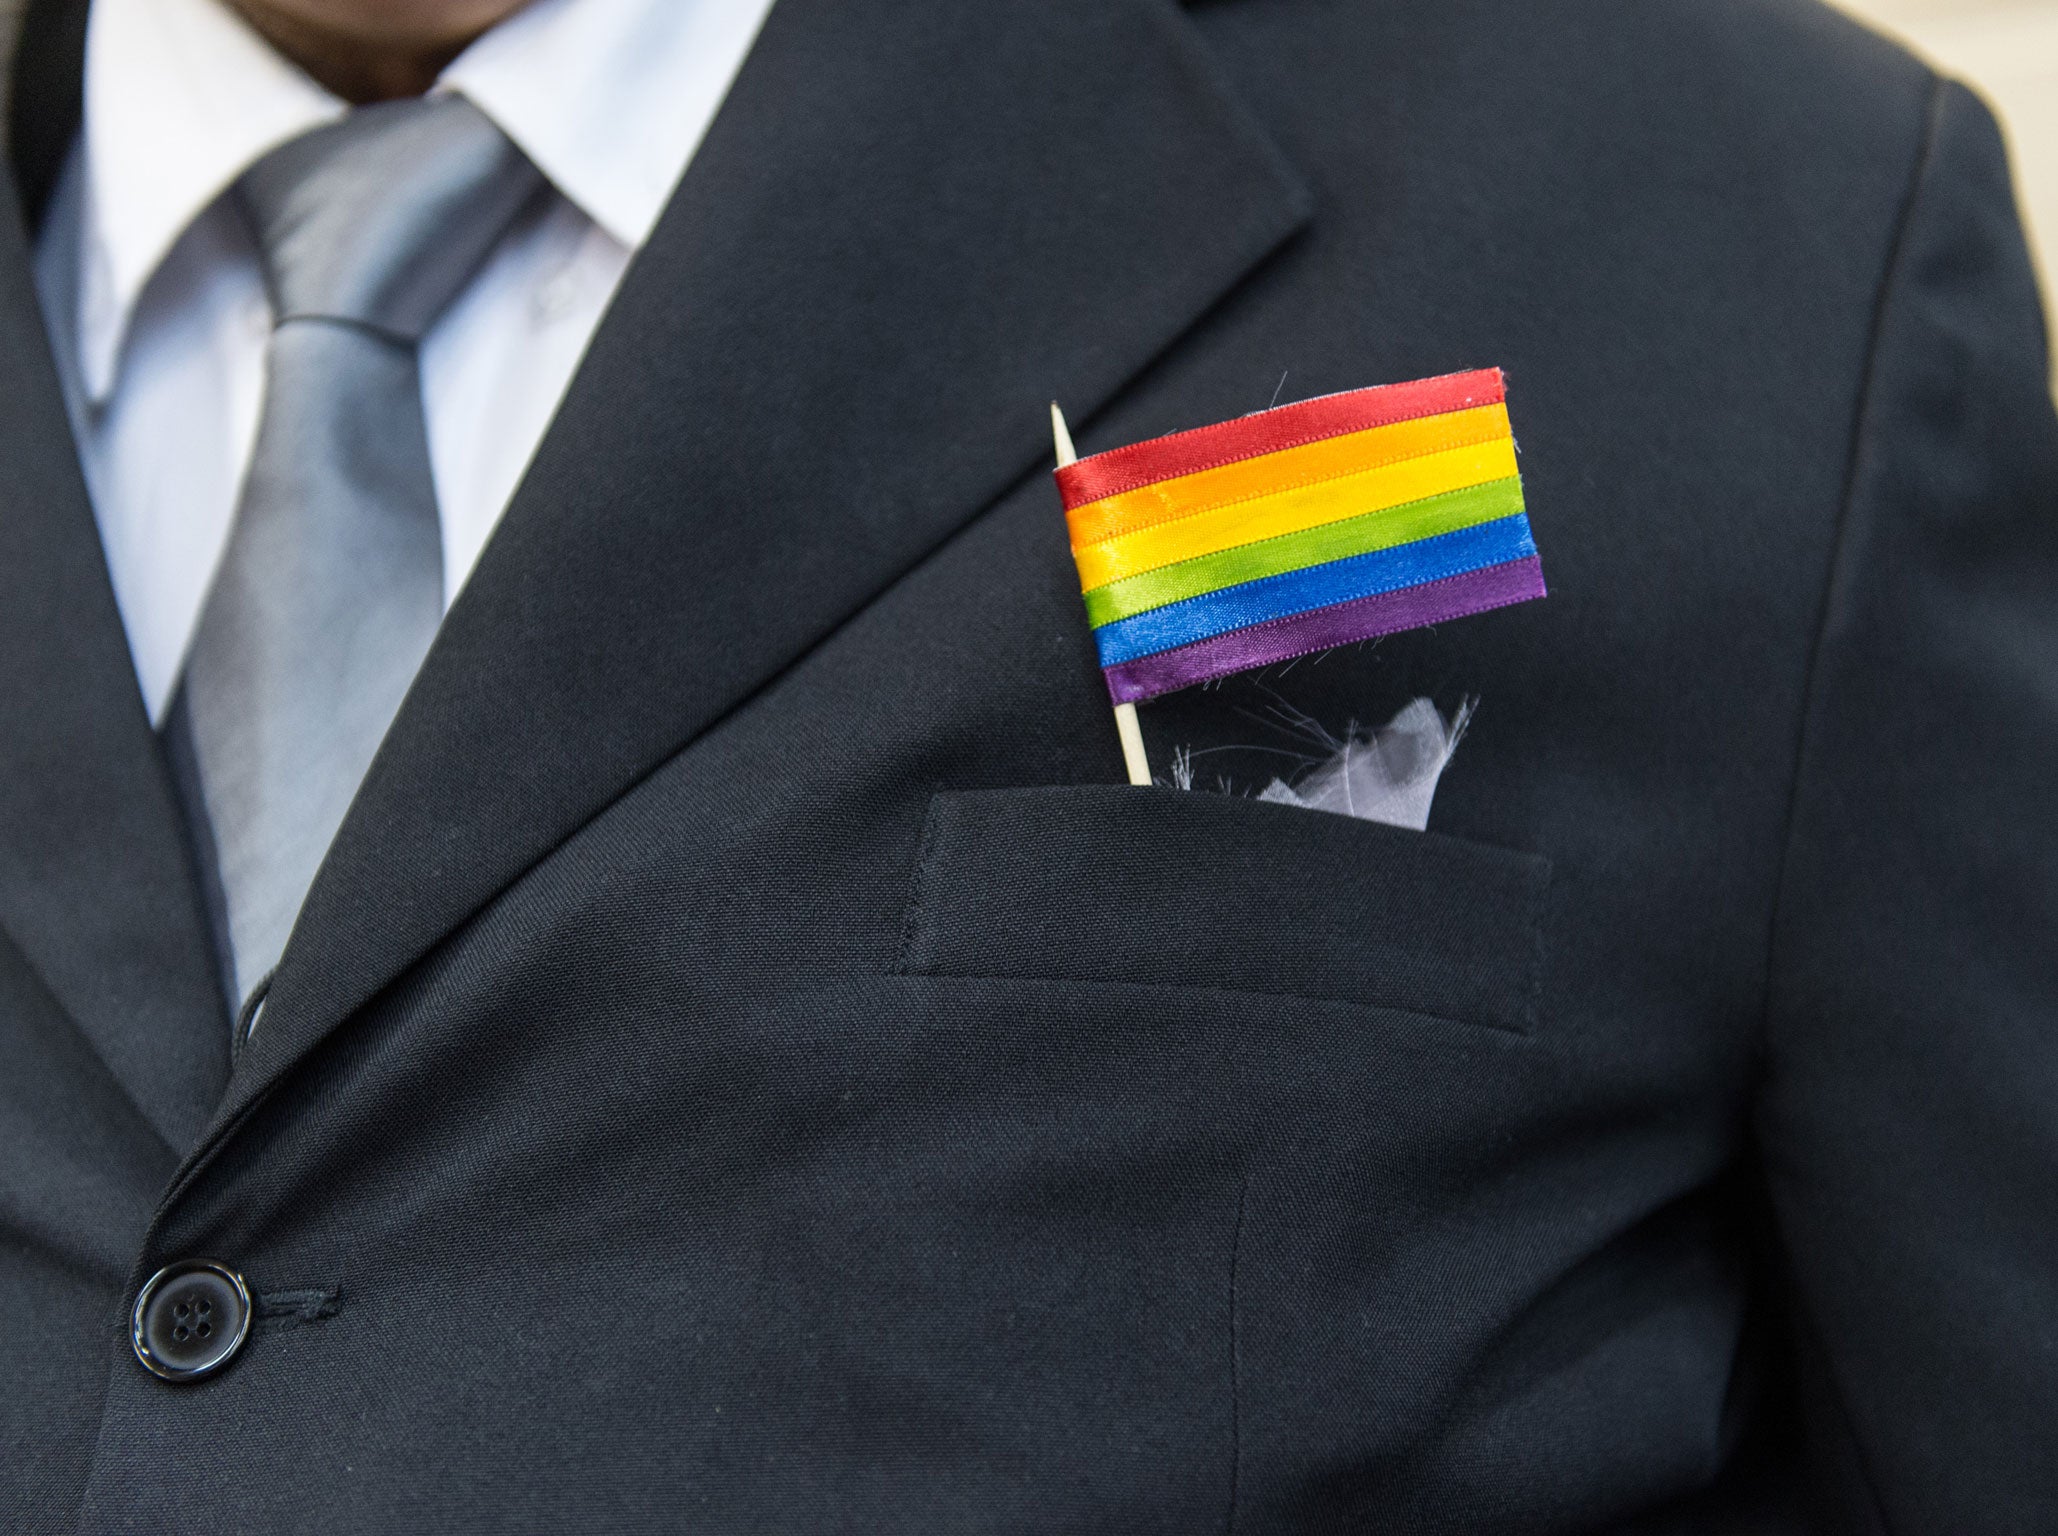 A judge has denied a straight couple a divorce, citing the same-sex marriage ruling